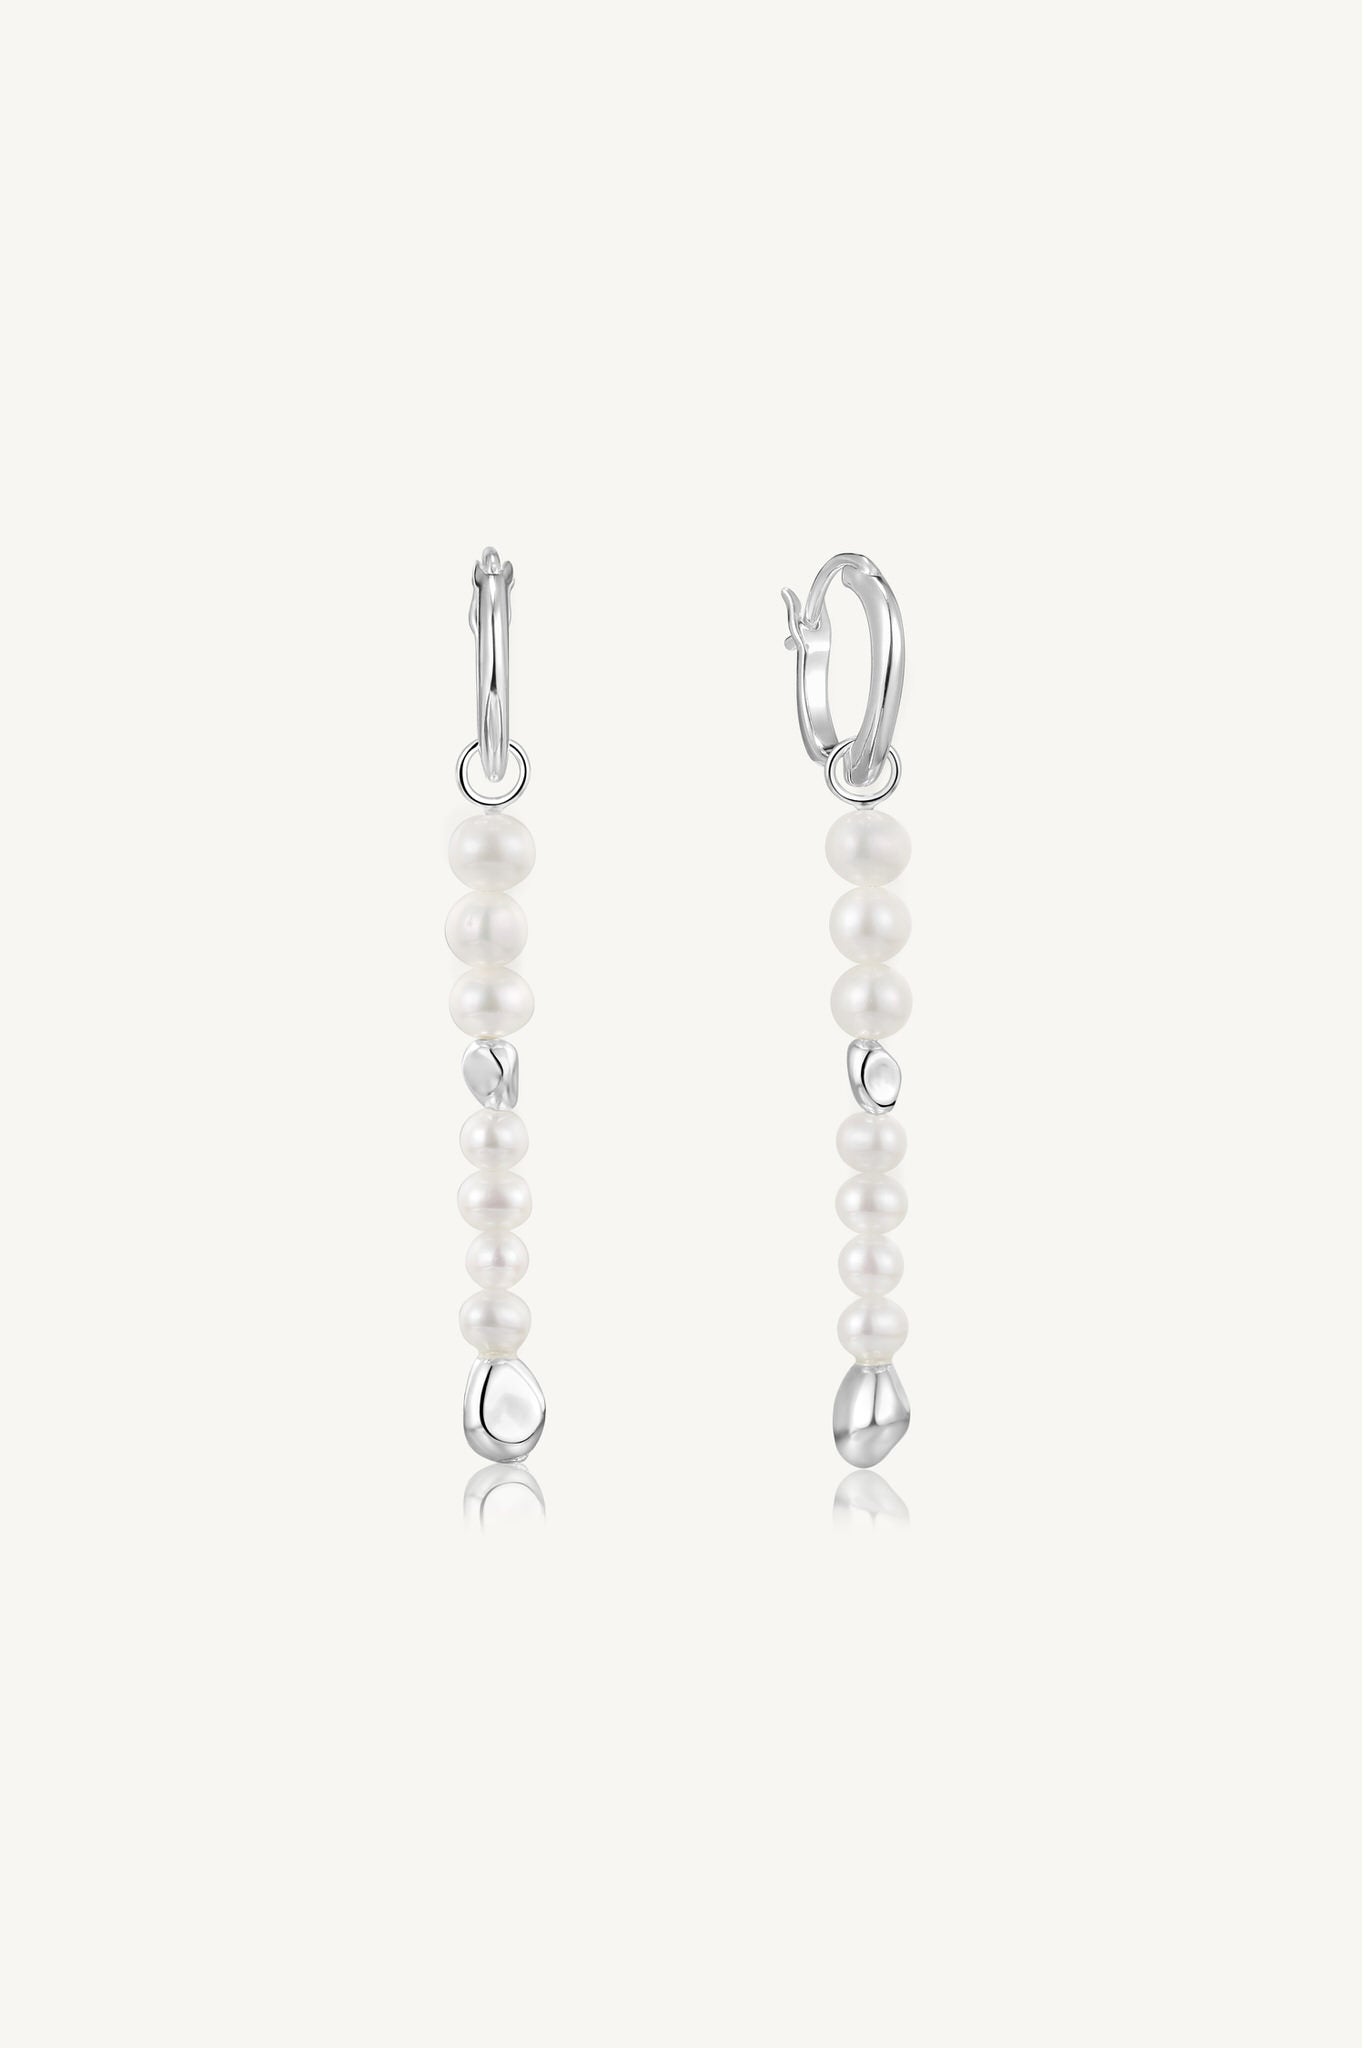 Round Freshwater Pearl with Sterling Silver Beads Earrings